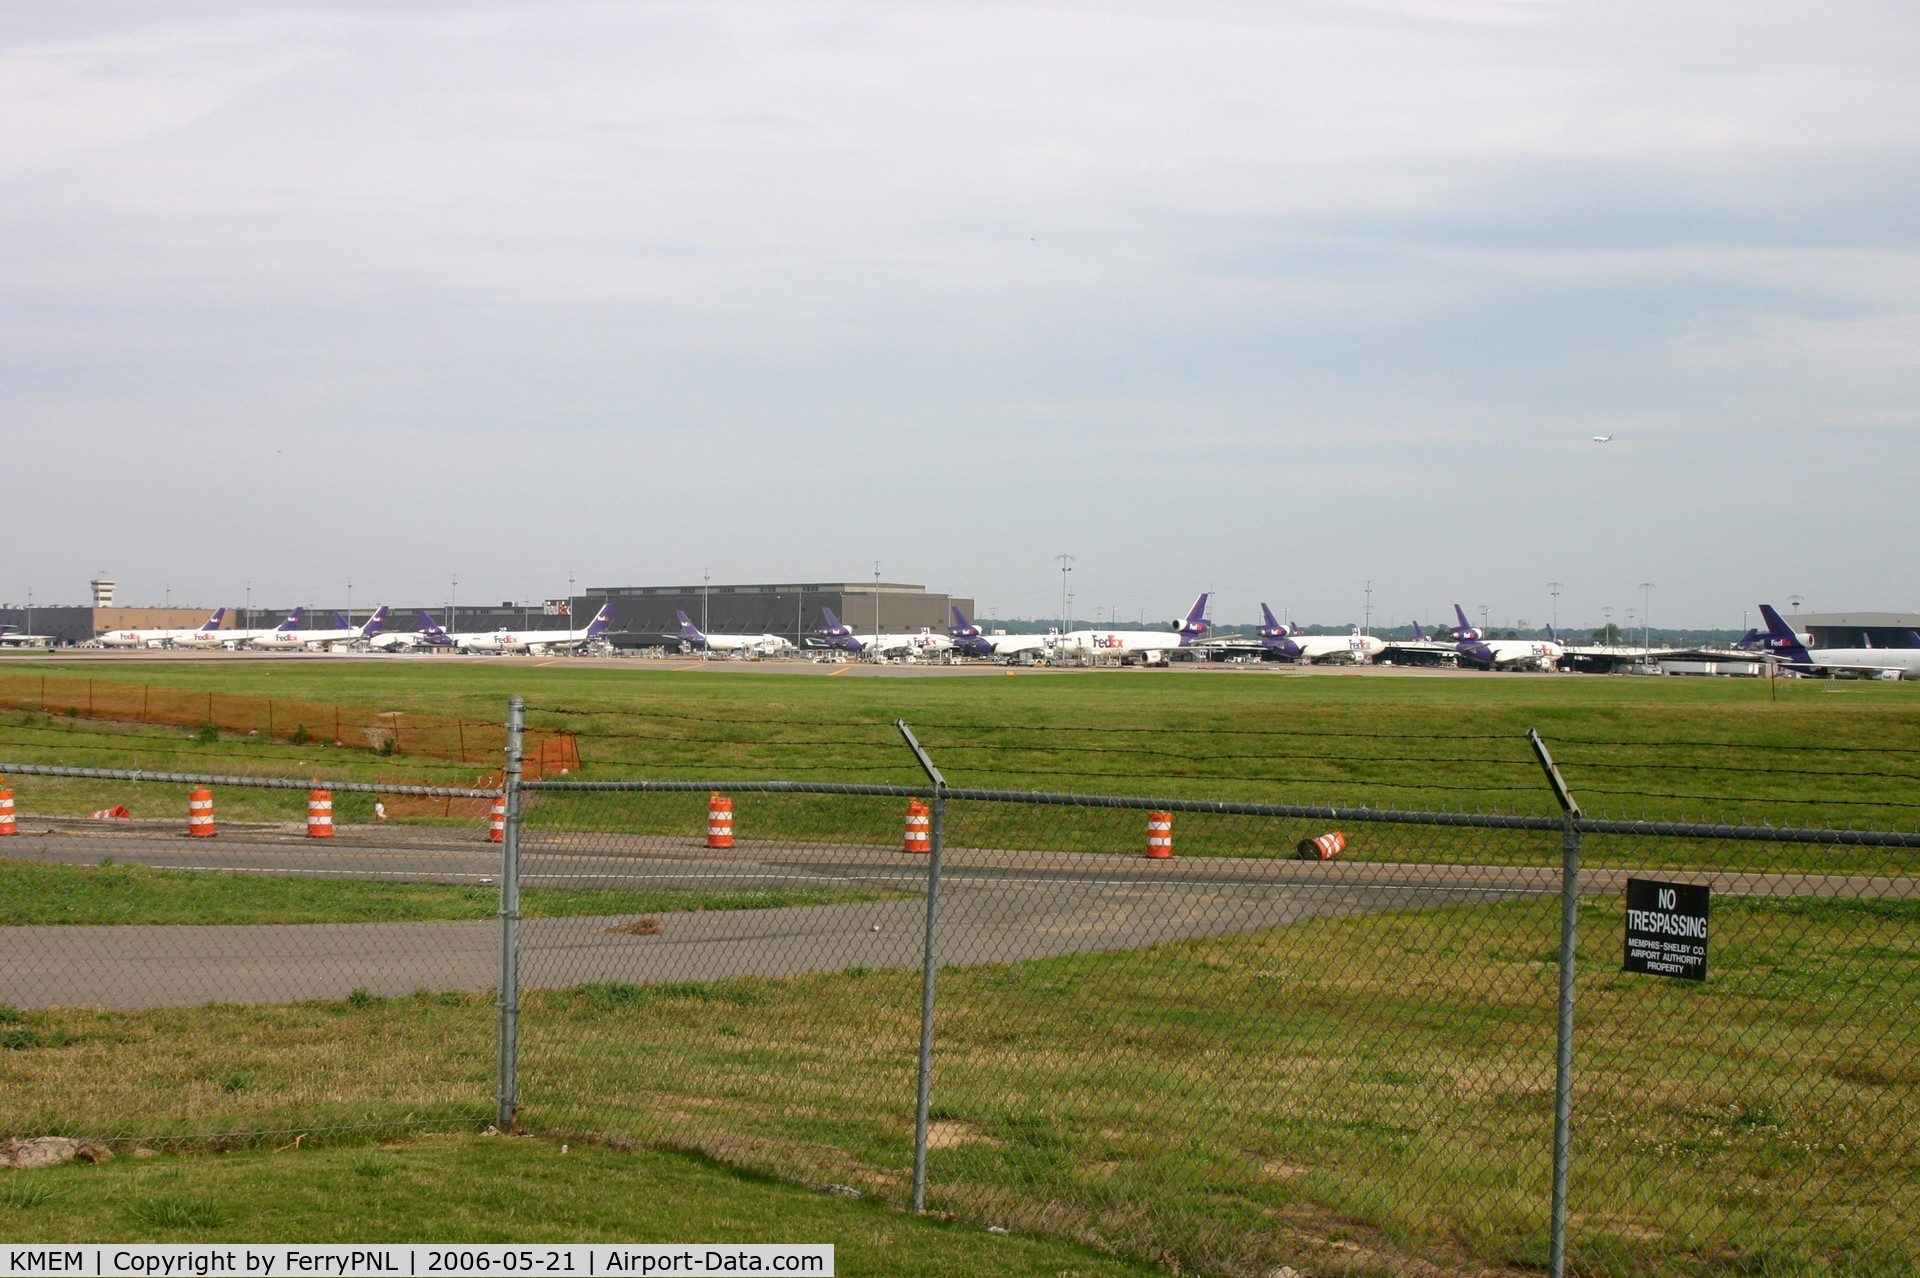 Memphis International Airport (MEM) - Overview of the Fedex operations back in 2006